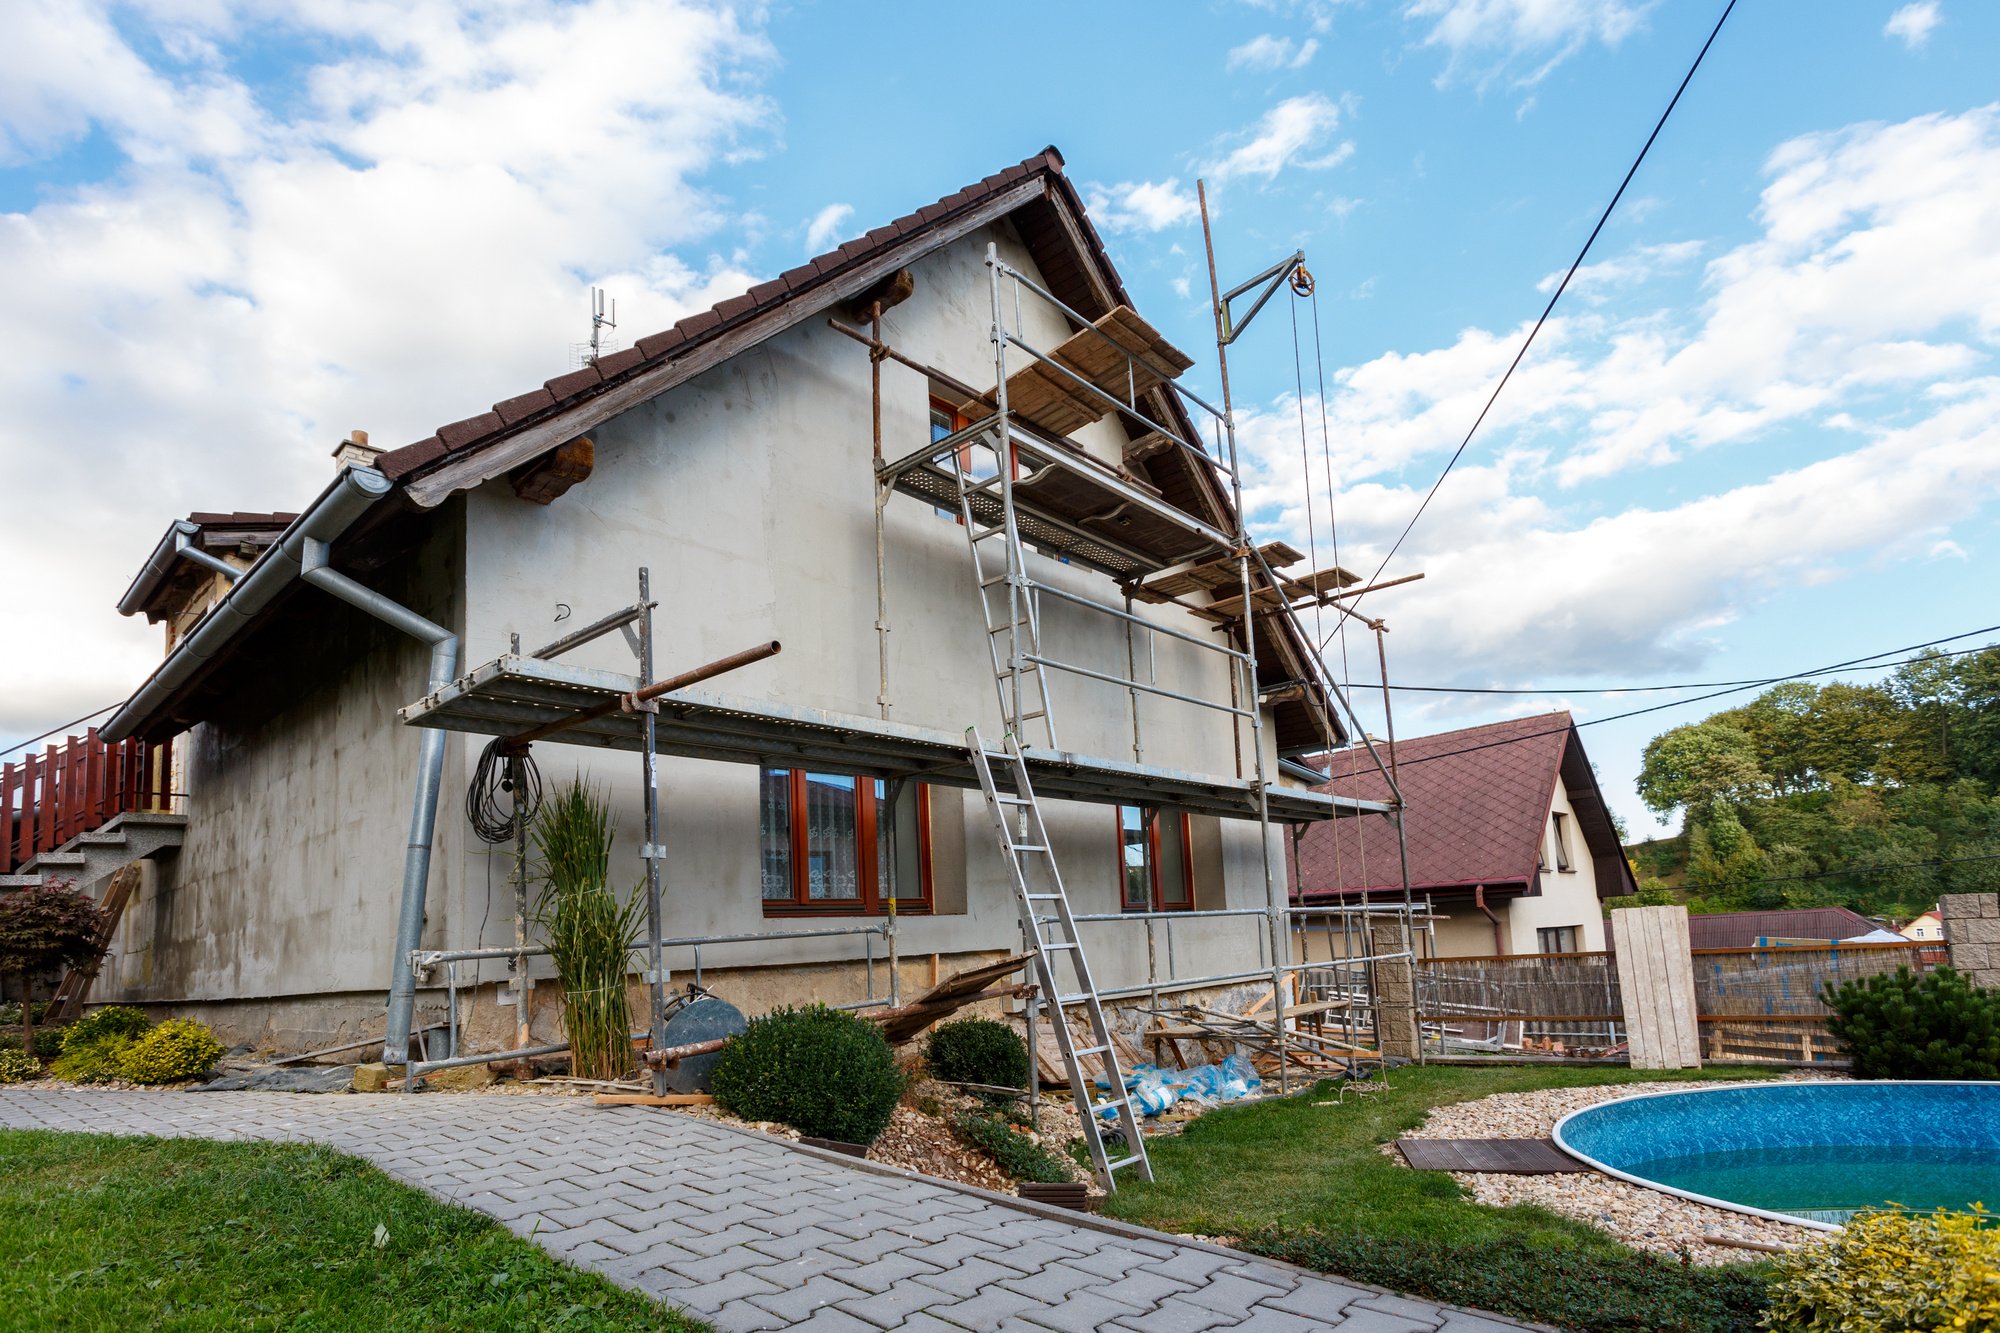 An exterior home repair is a huge investment, so you want to be sure you do it right. So stick around for some helpful tips.